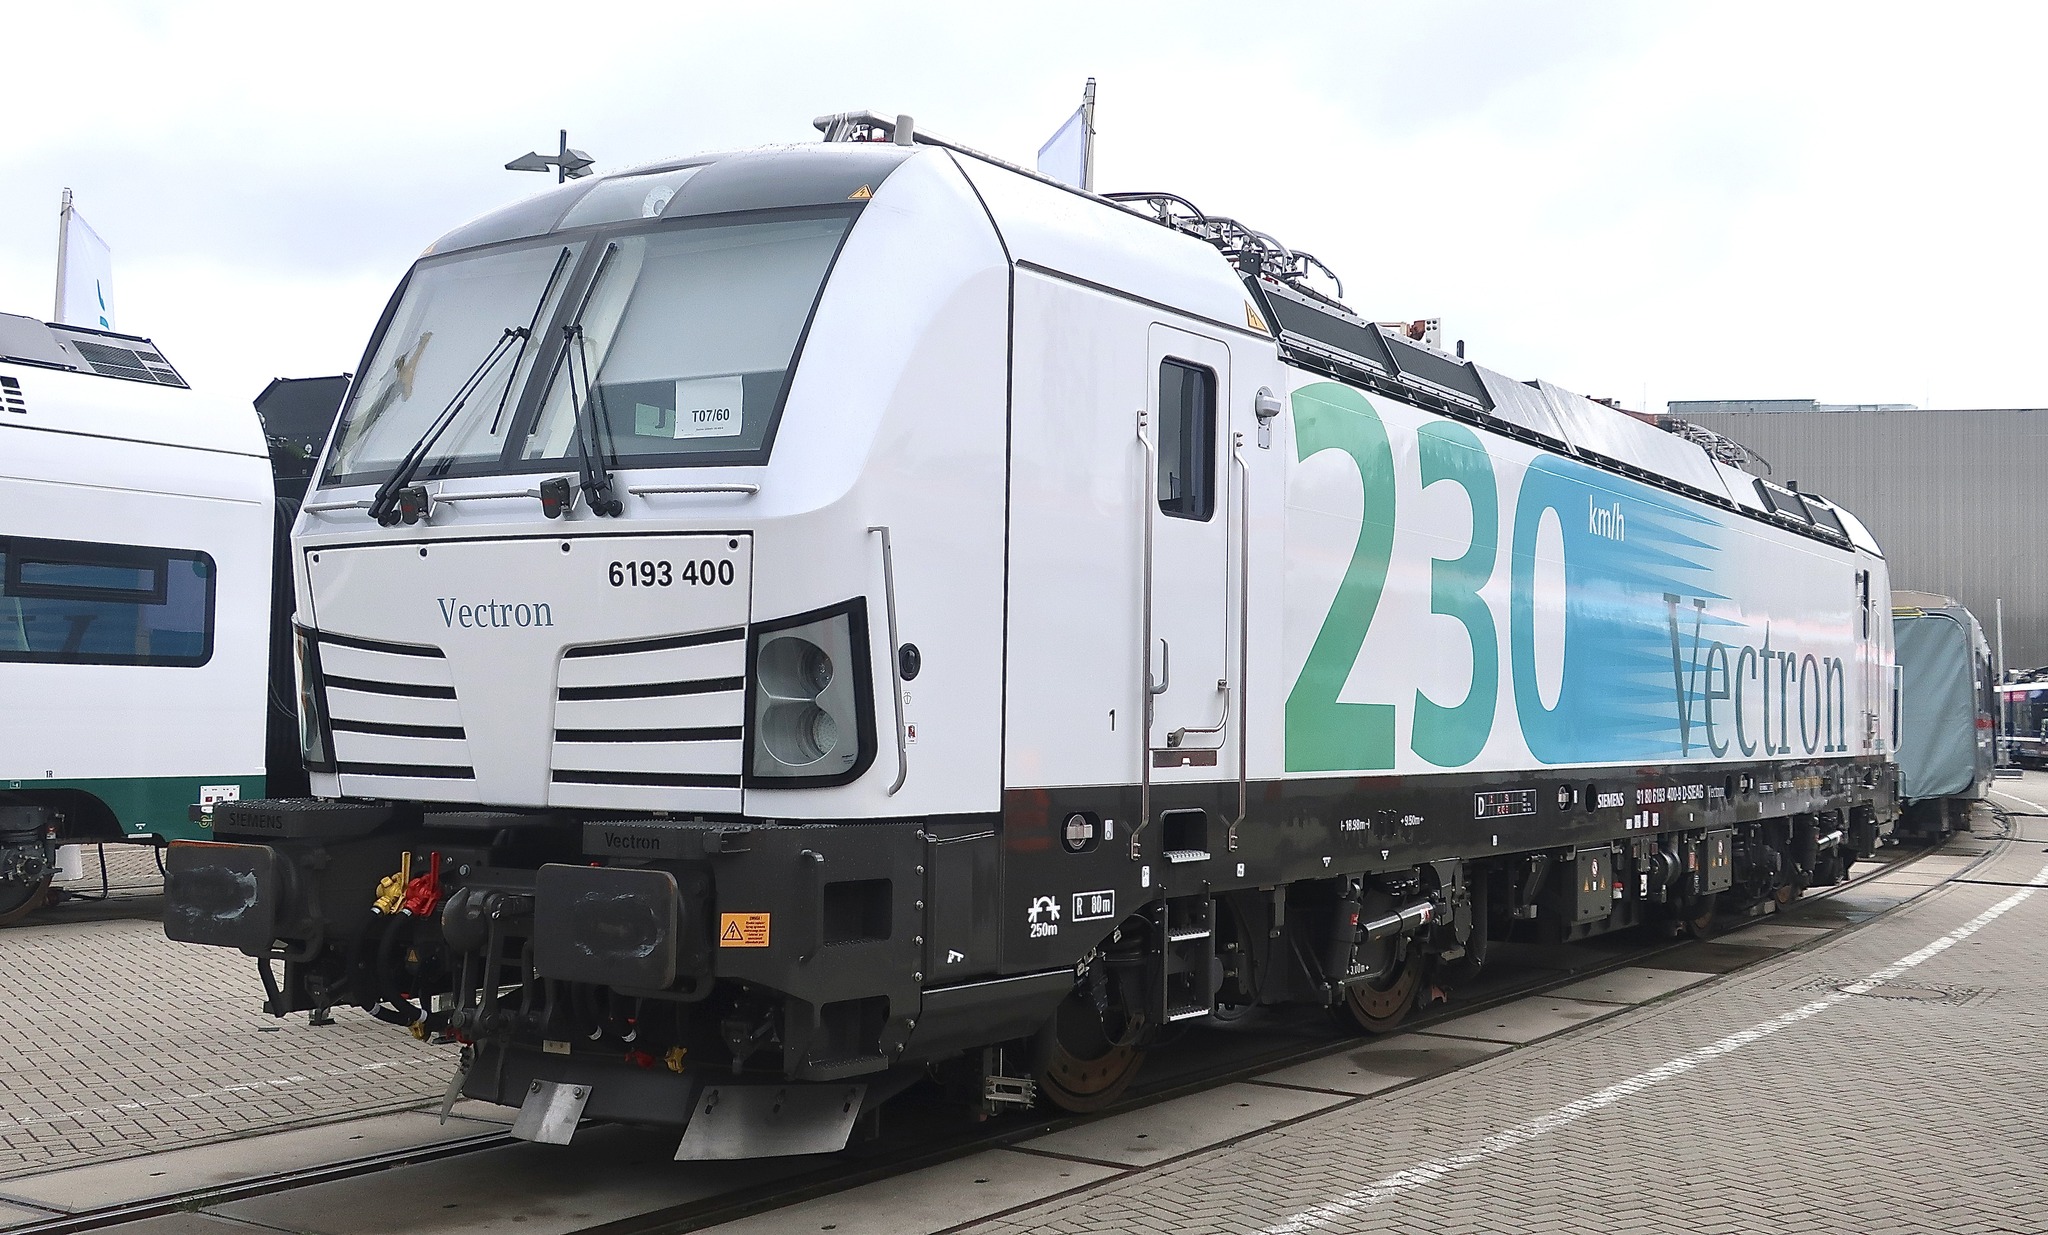 Vectron MS electric locomotive produced by Siemens Mobility for the Czech ČD operator